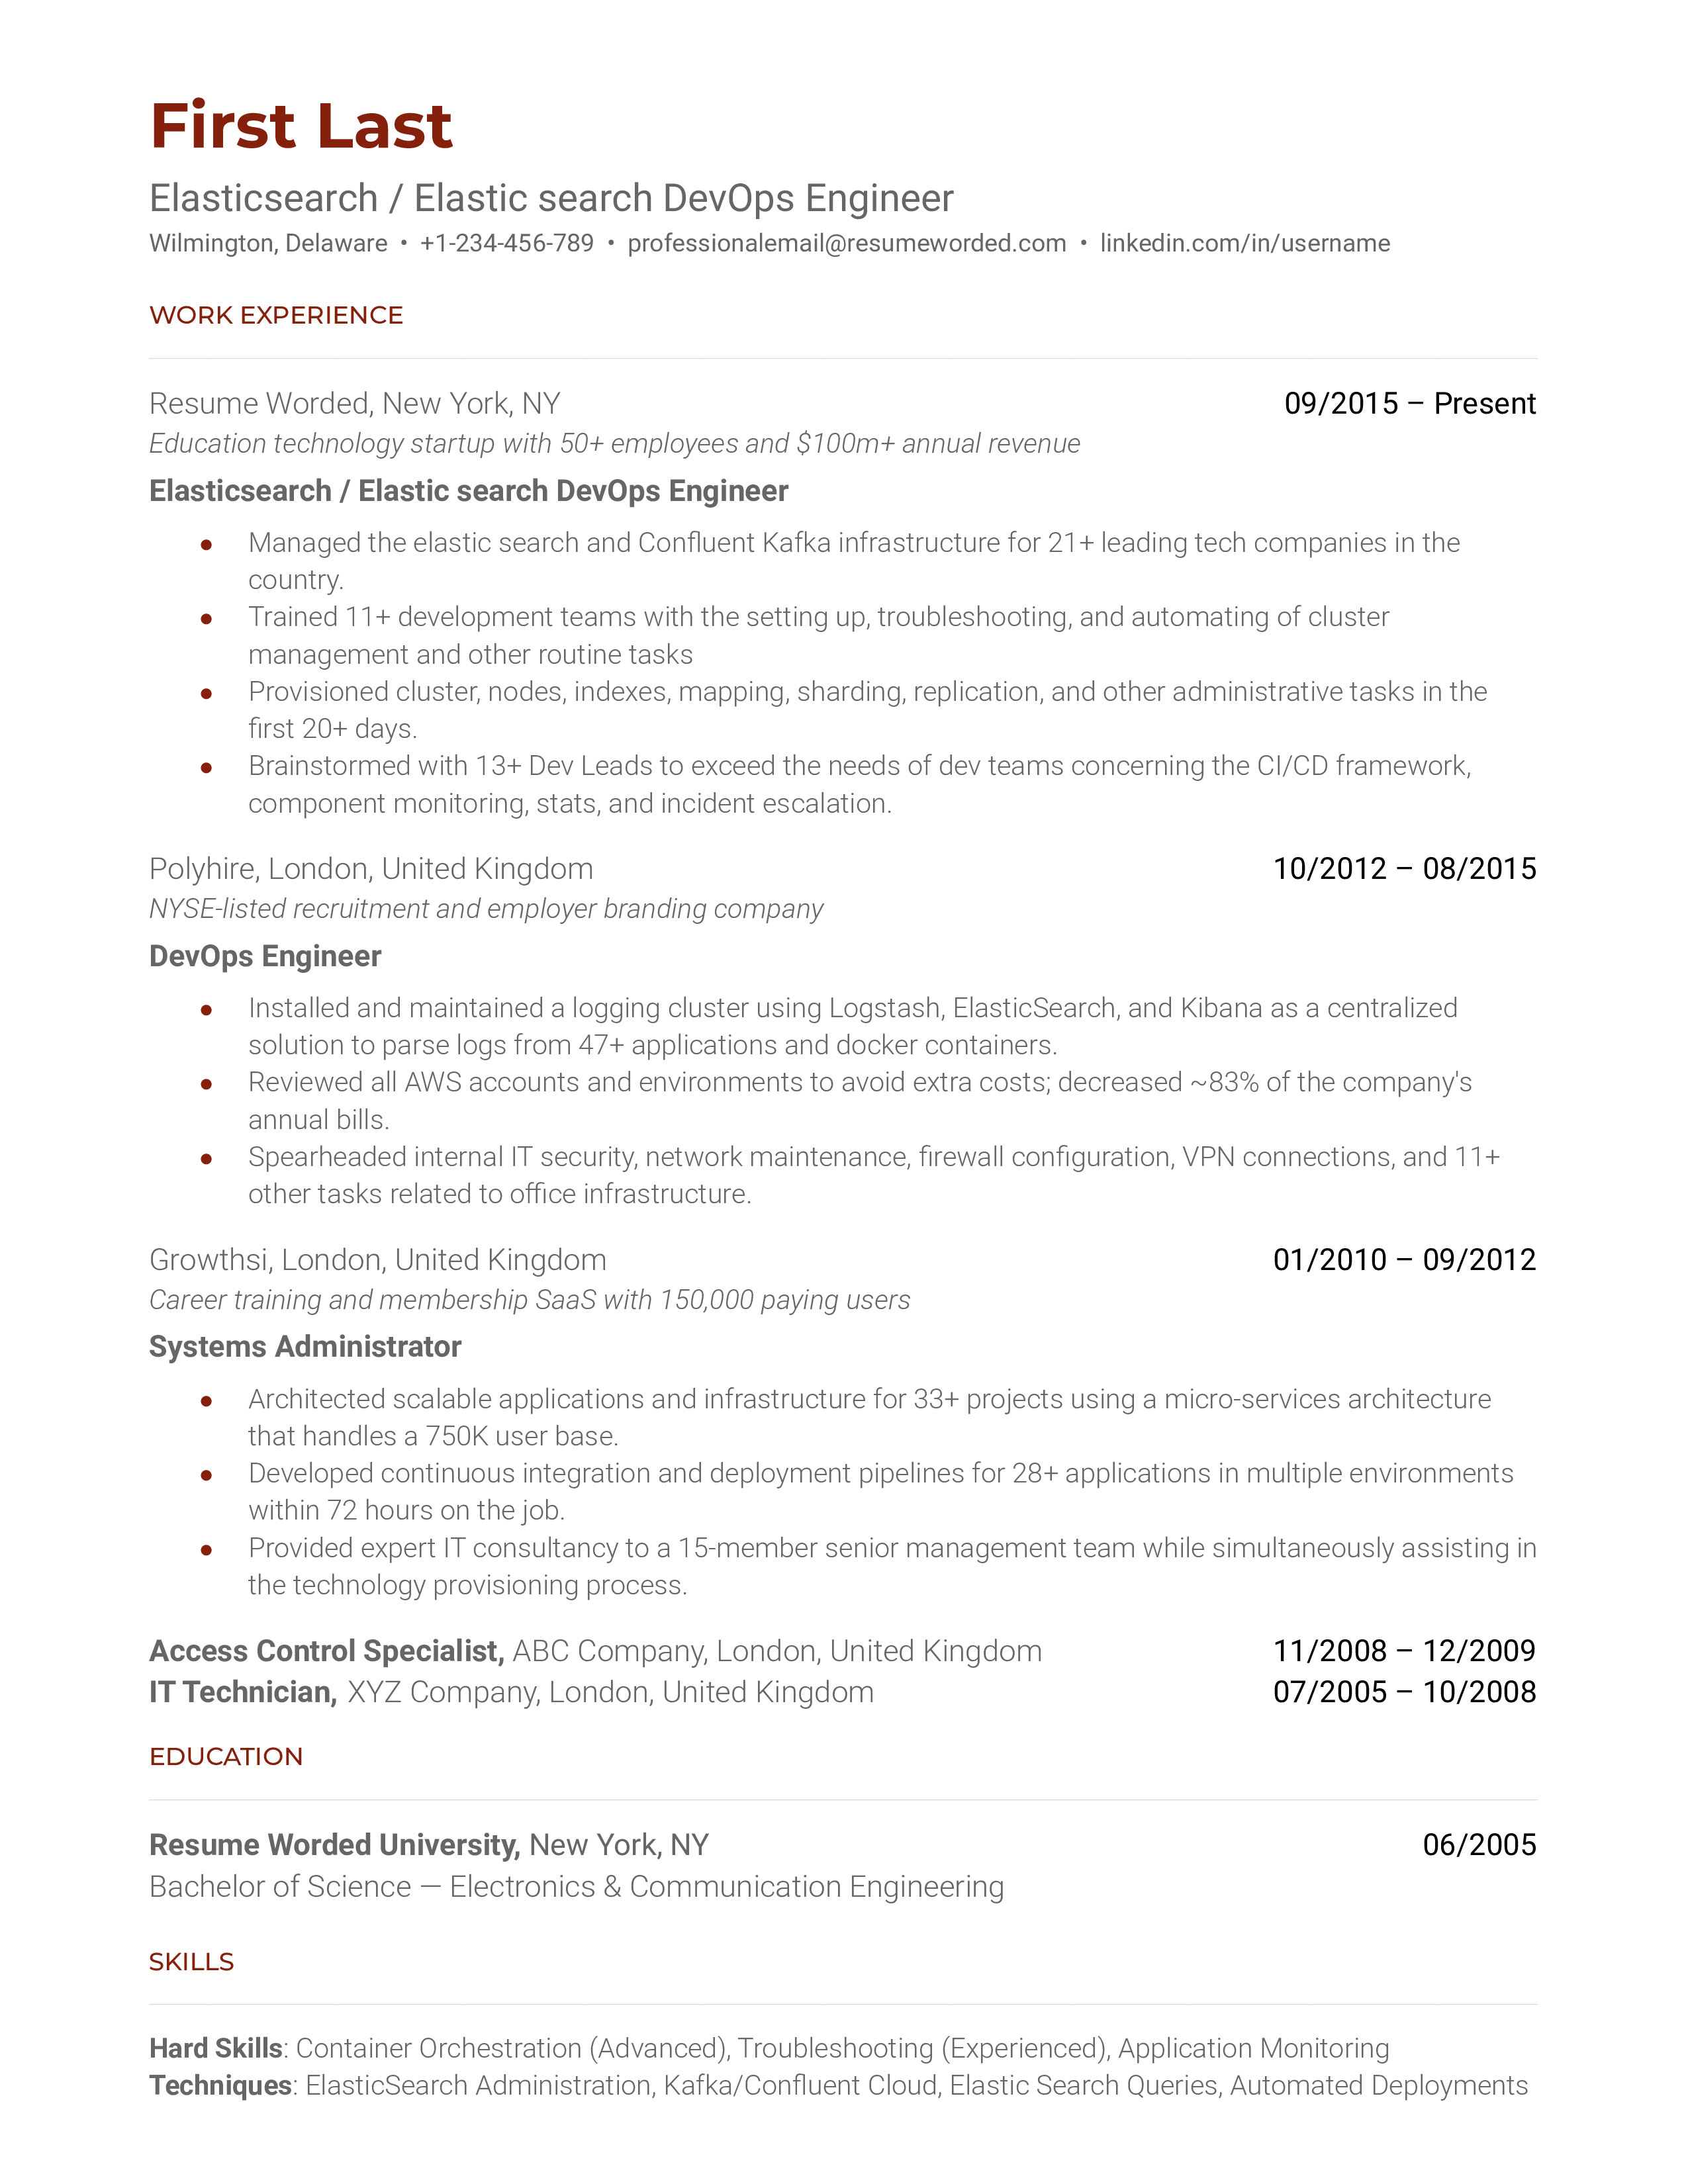 A resume for a elasticsearch DevOps engineer with a dgeree in electronics and communication engineering and experience as a DevOps engineer.